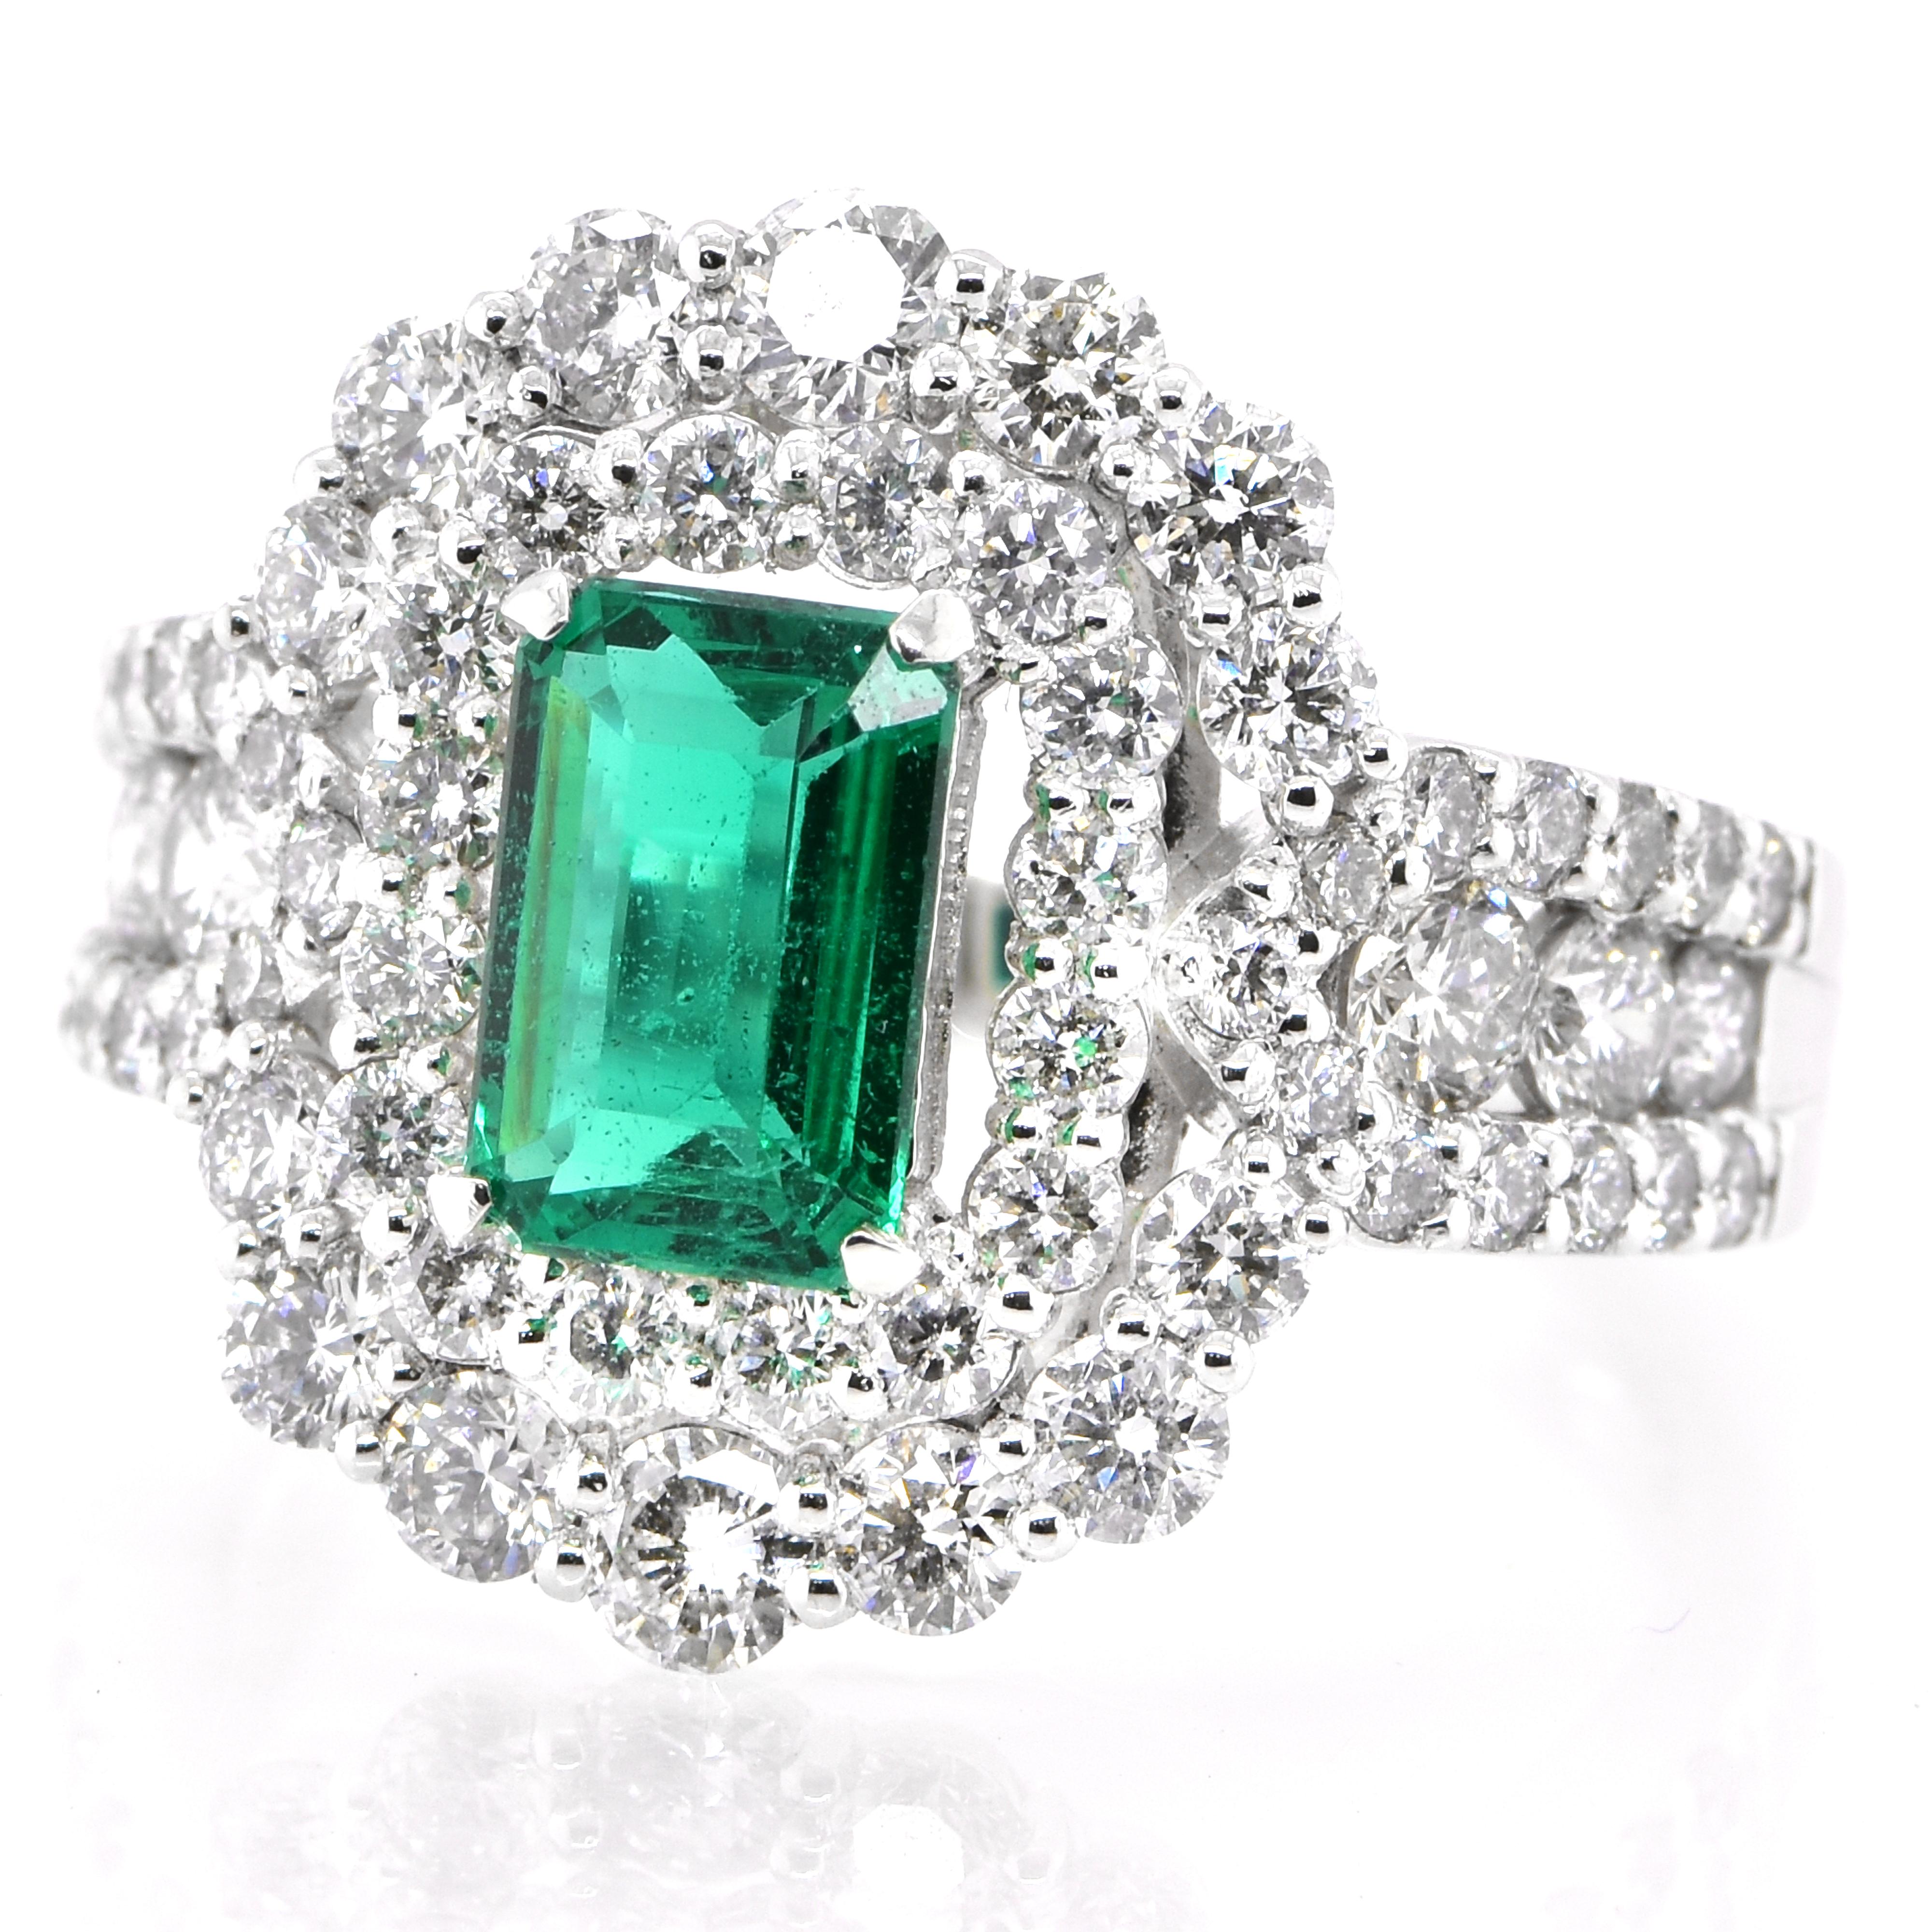 A stunning ring featuring a GIA Certified 1.17 Carat Natural, Untreated (No Oil), Zambian Emerald and 1.72 Carats of Diamond Accents set in Platinum. People have admired emerald’s green for thousands of years. Emeralds have always been associated